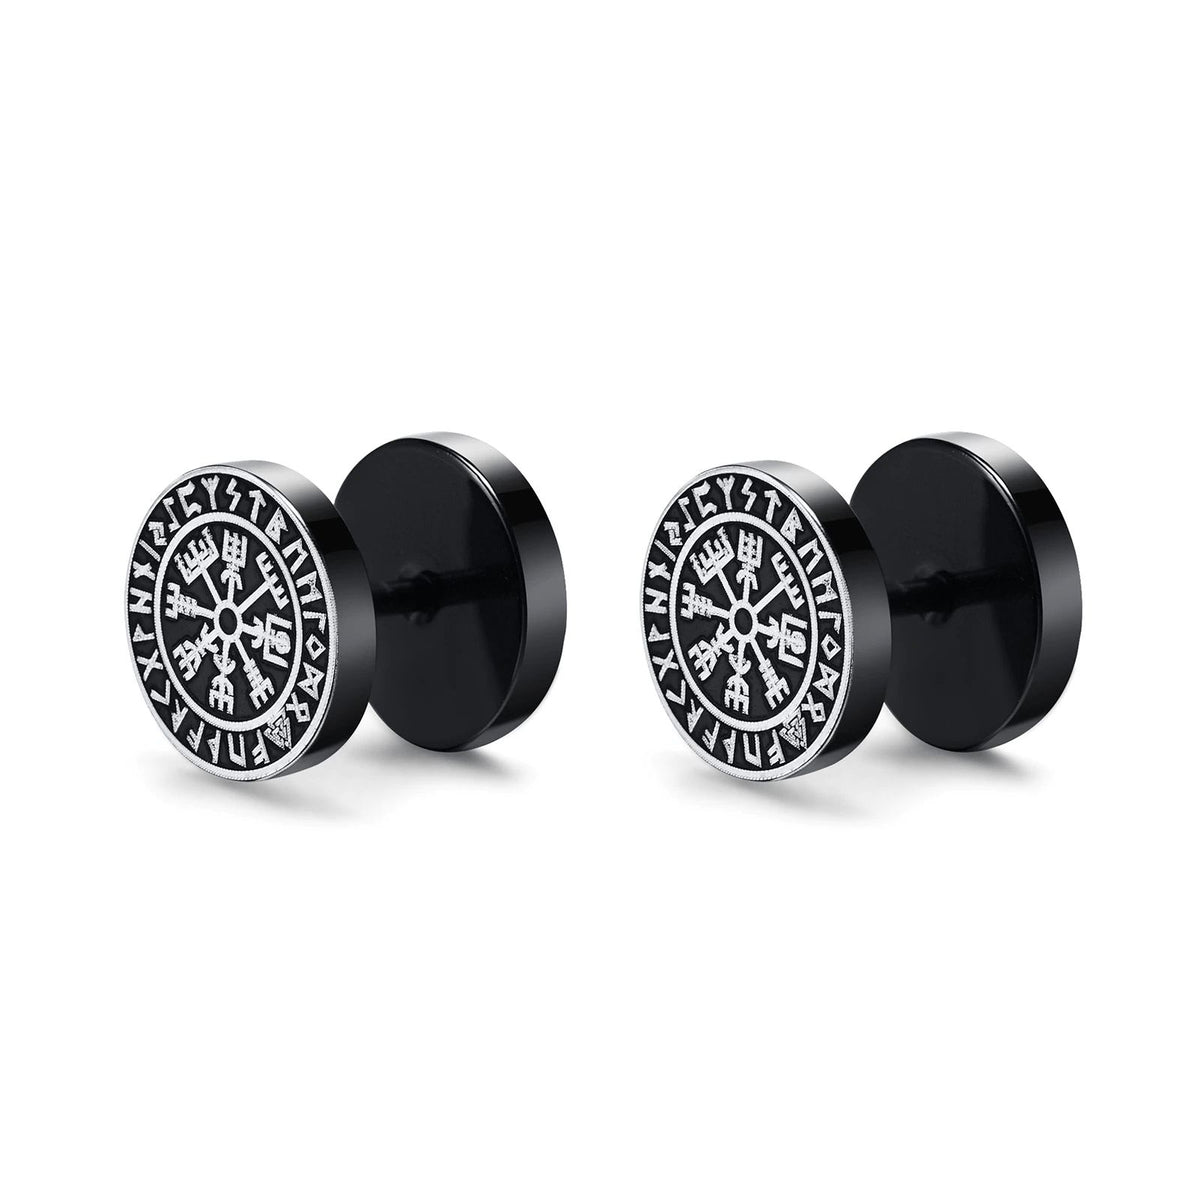 Viking Earrings with Norse Vegvisir Compass Symbol - Black Studs-2